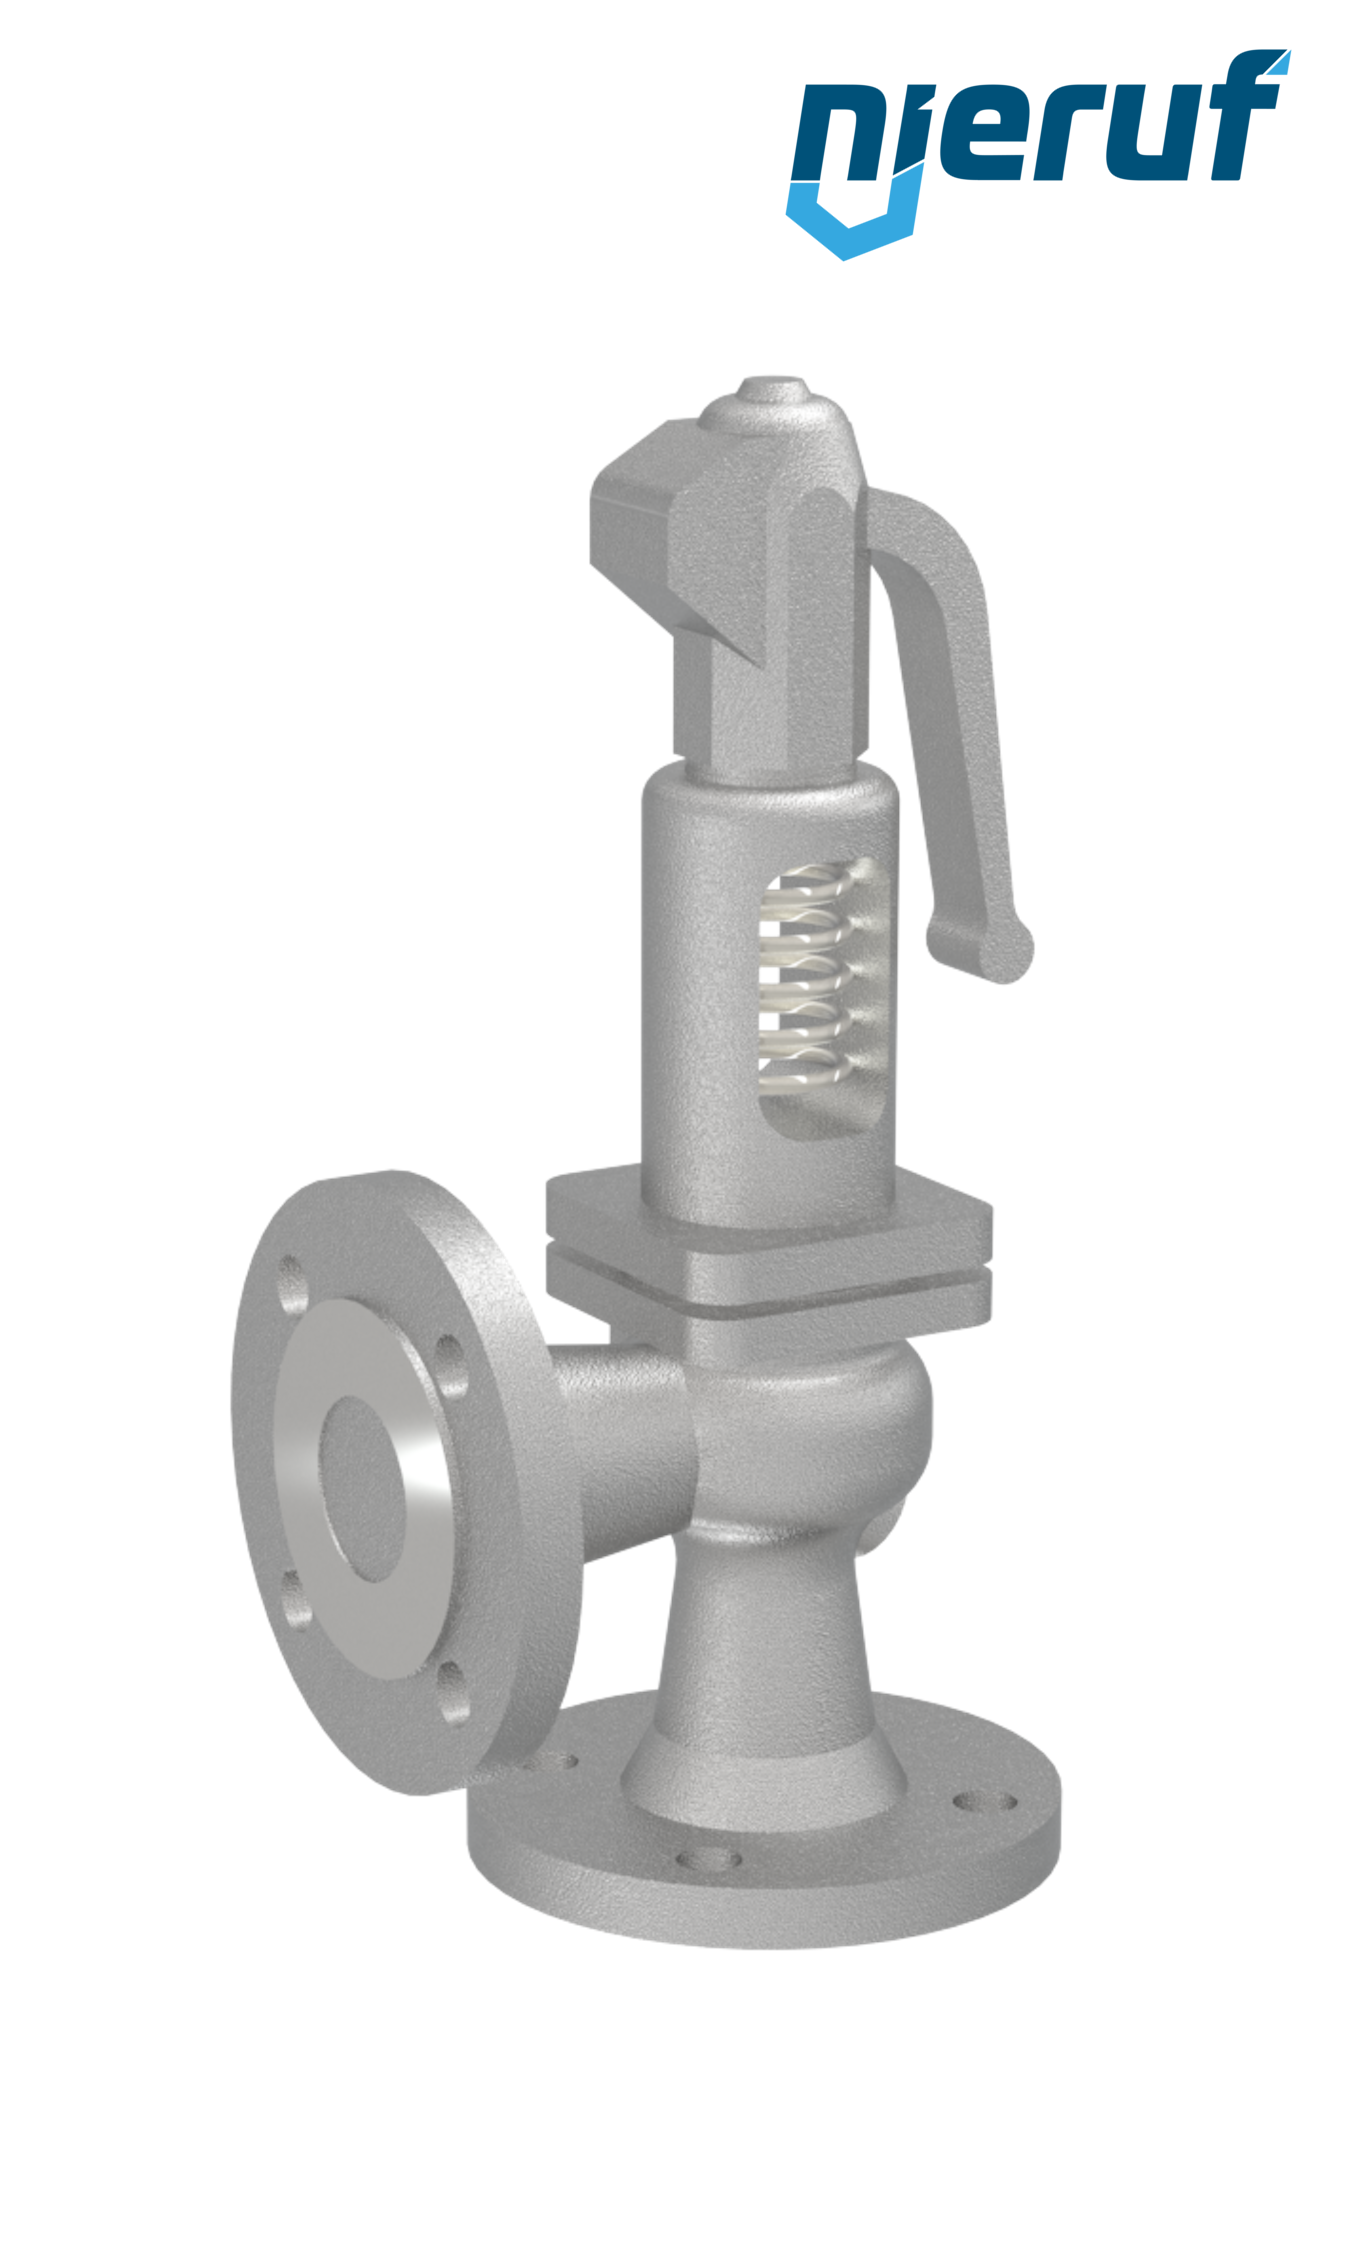 flange-safety valve DN40/DN40 SF0102, cast iron EN-JL1040 metal, with lever